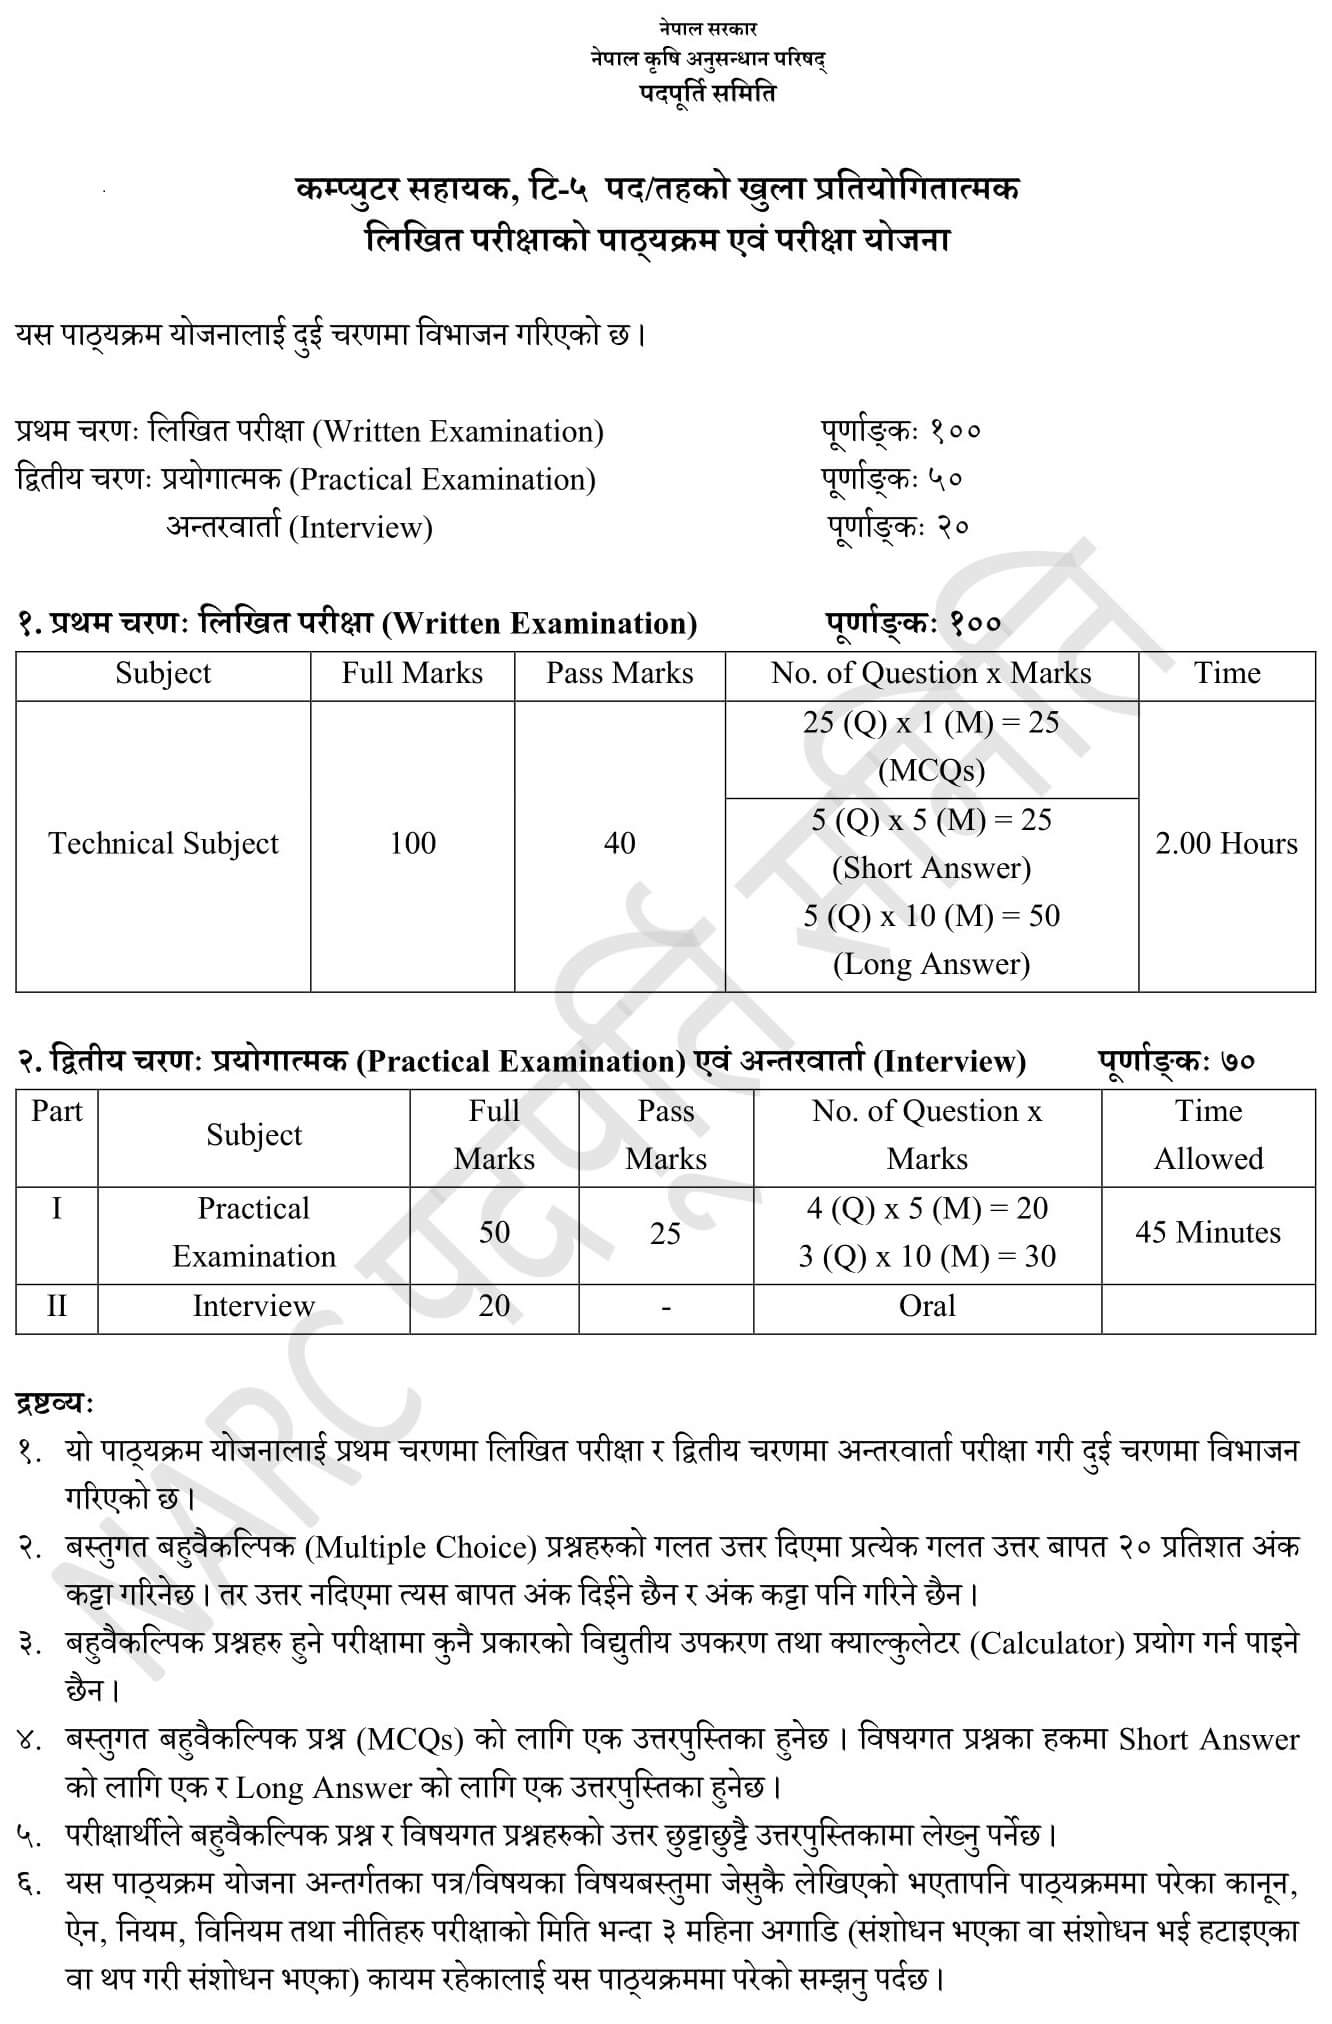 Nepal Agricultural Research Council Level 5 Computer Operator Syllabus. NARC Level Computer Operator Syllabus. NARC Syllabus PDF